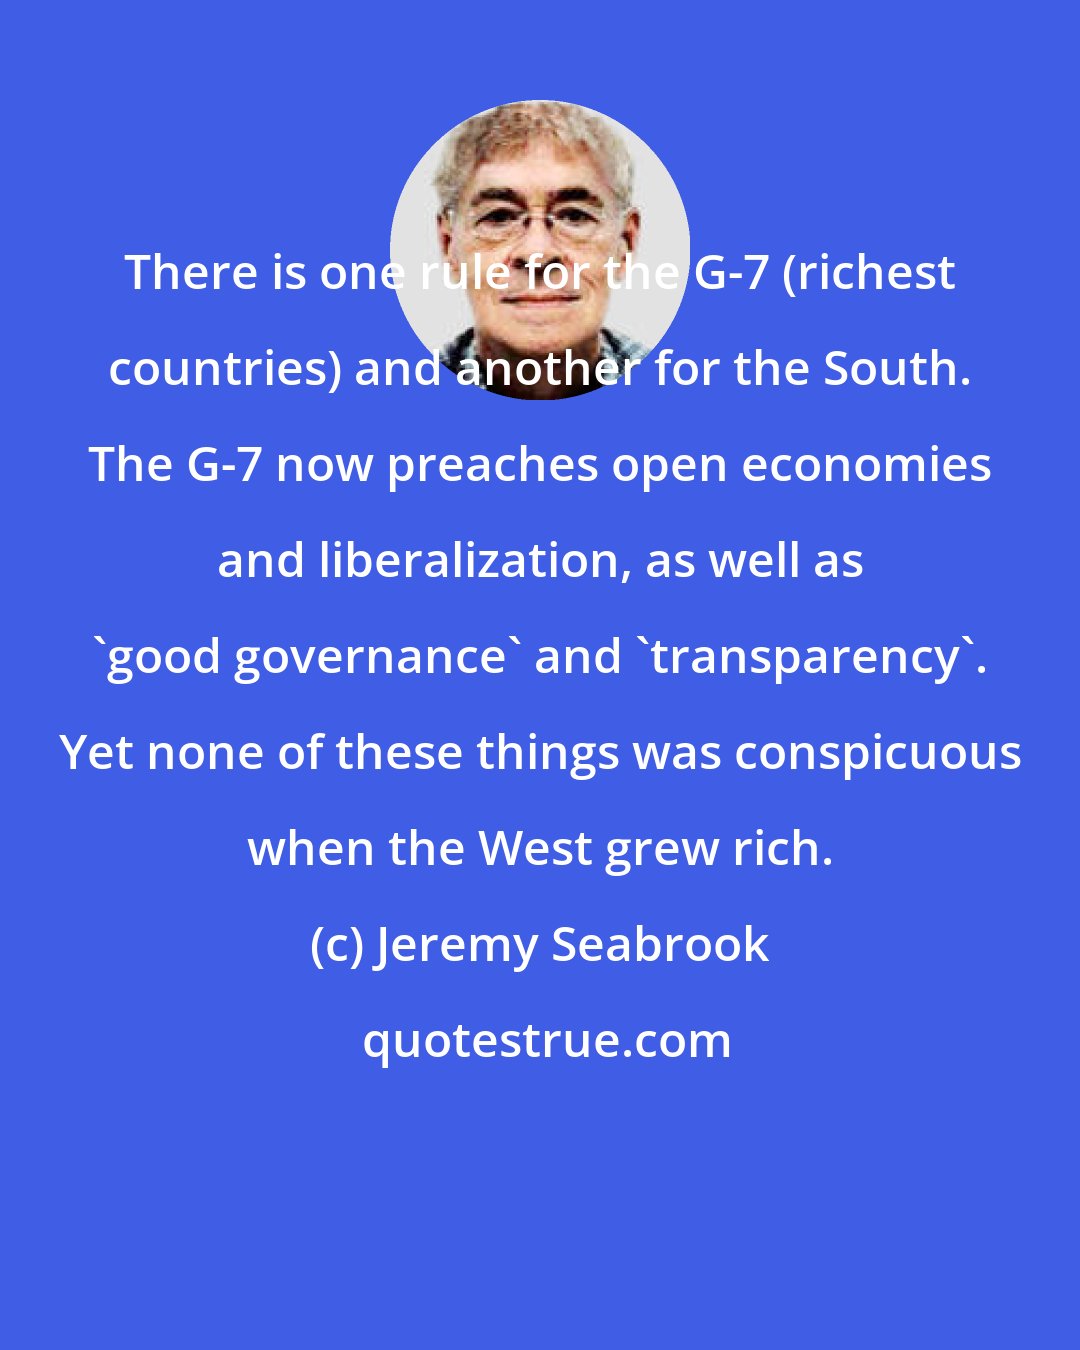 Jeremy Seabrook: There is one rule for the G-7 (richest countries) and another for the South. The G-7 now preaches open economies and liberalization, as well as 'good governance' and 'transparency'. Yet none of these things was conspicuous when the West grew rich.